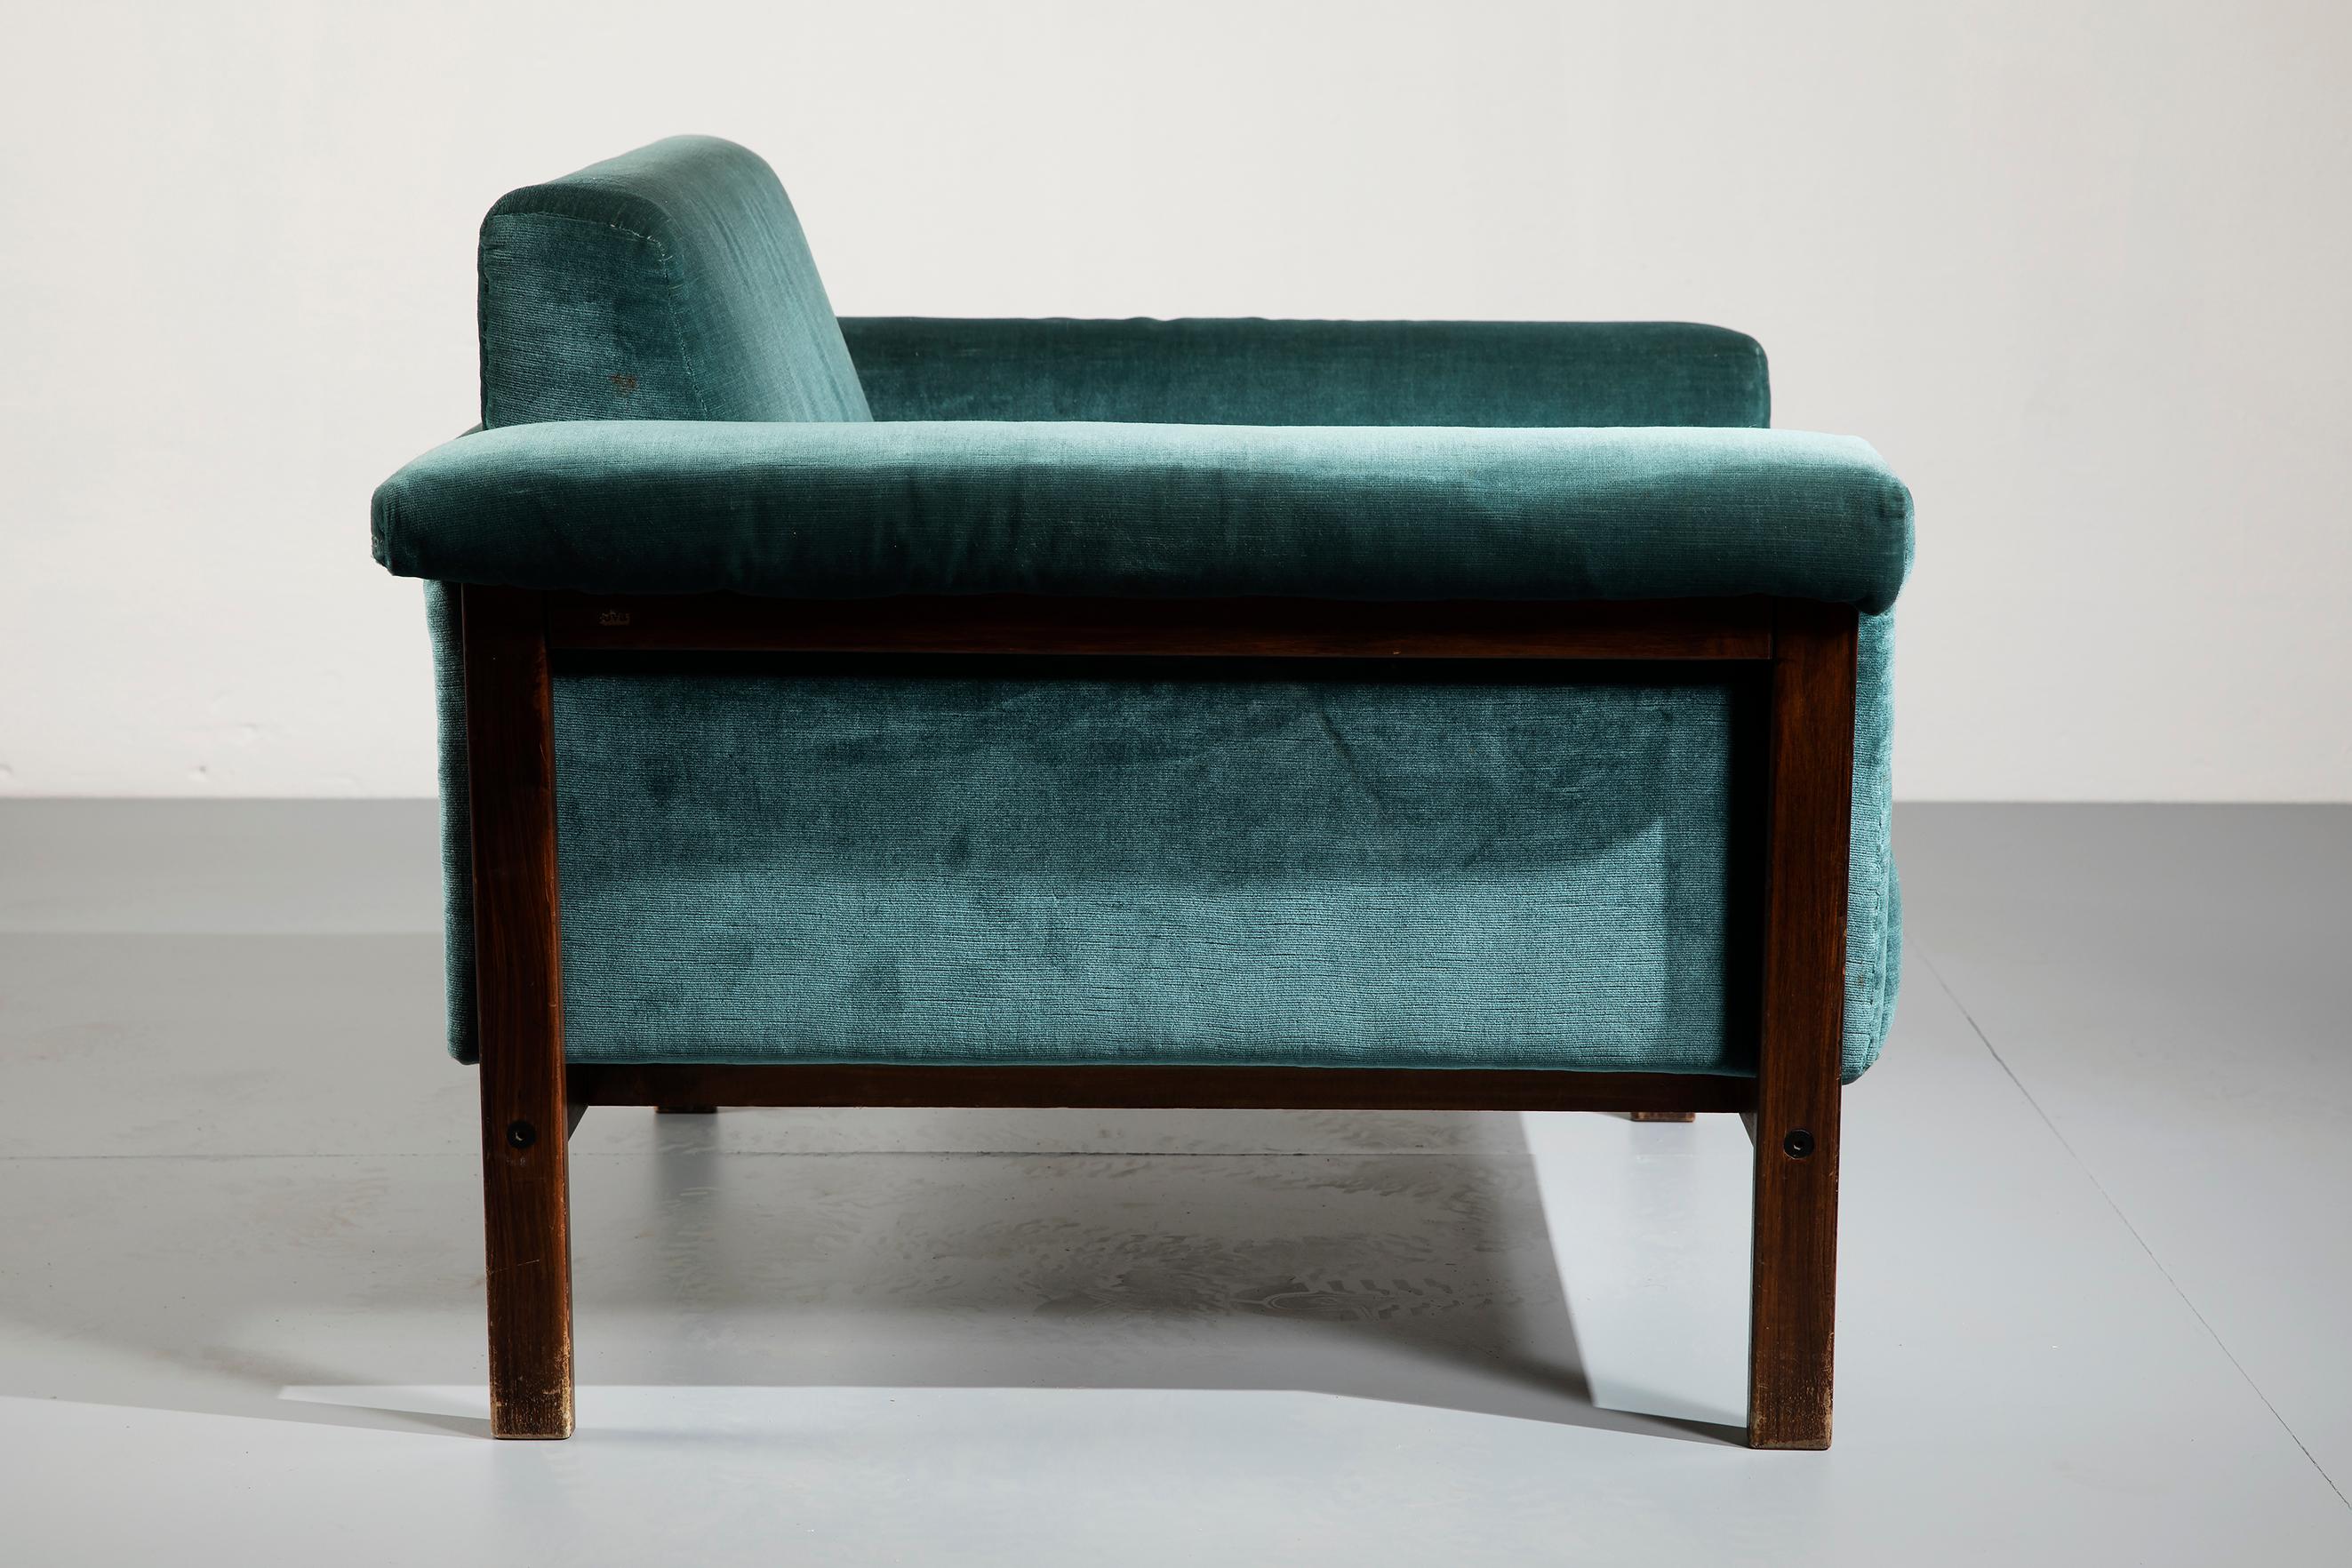 Ettore Sottsass Rosewood and Teal Fabric 'Canada' Armchair for Poltronova, 1958 For Sale 1